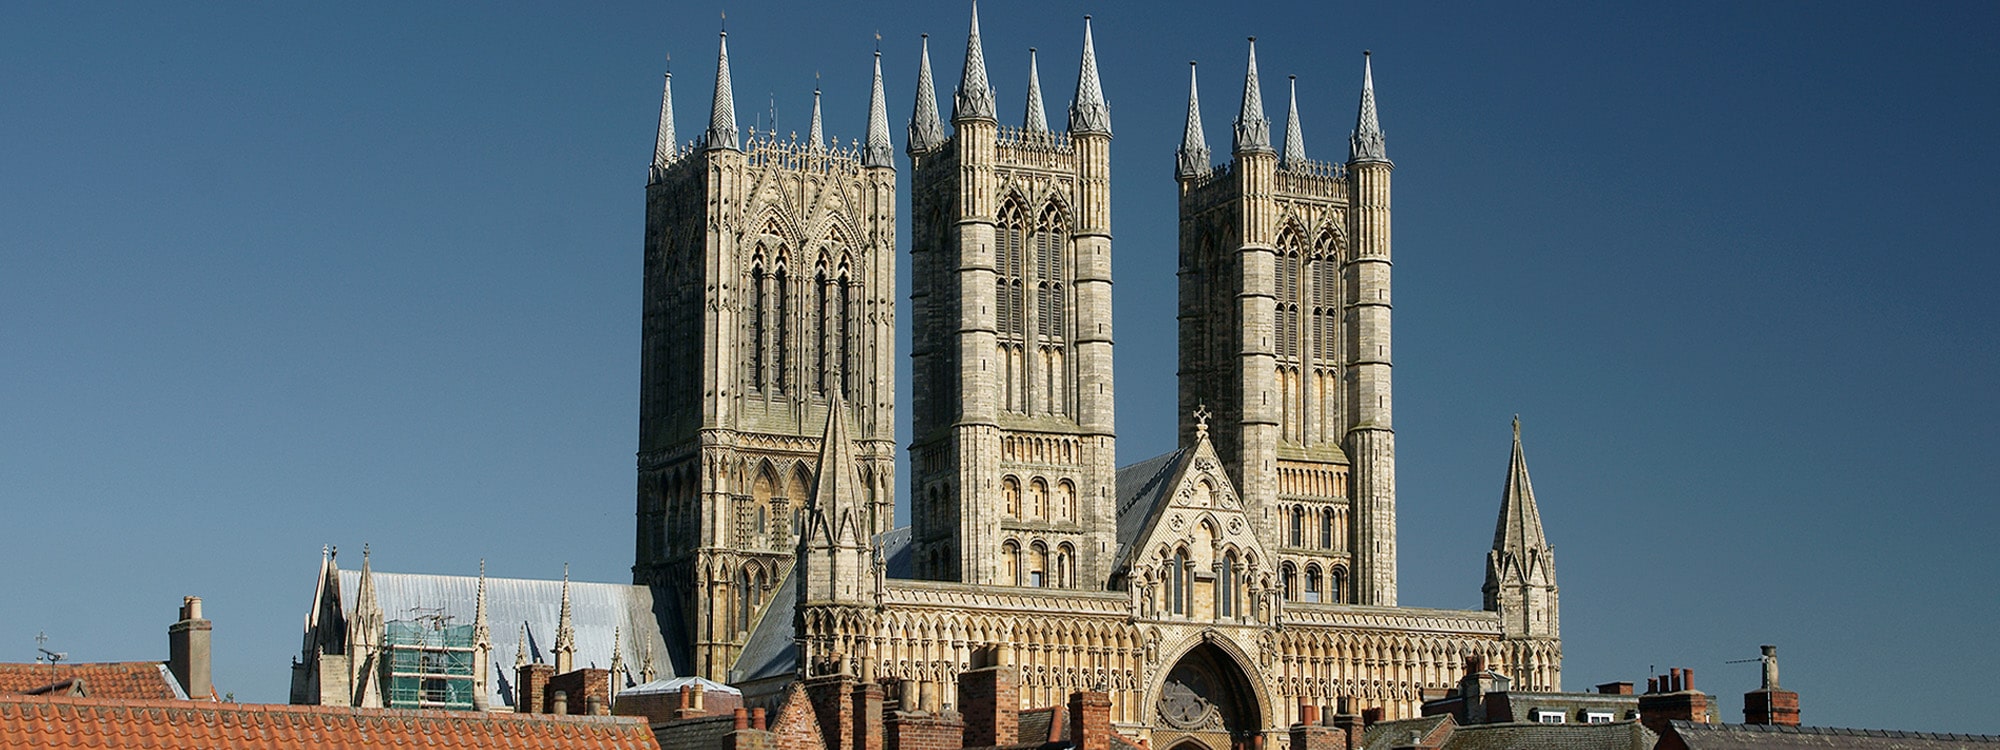 Lincoln cathedral with a blue sky behind